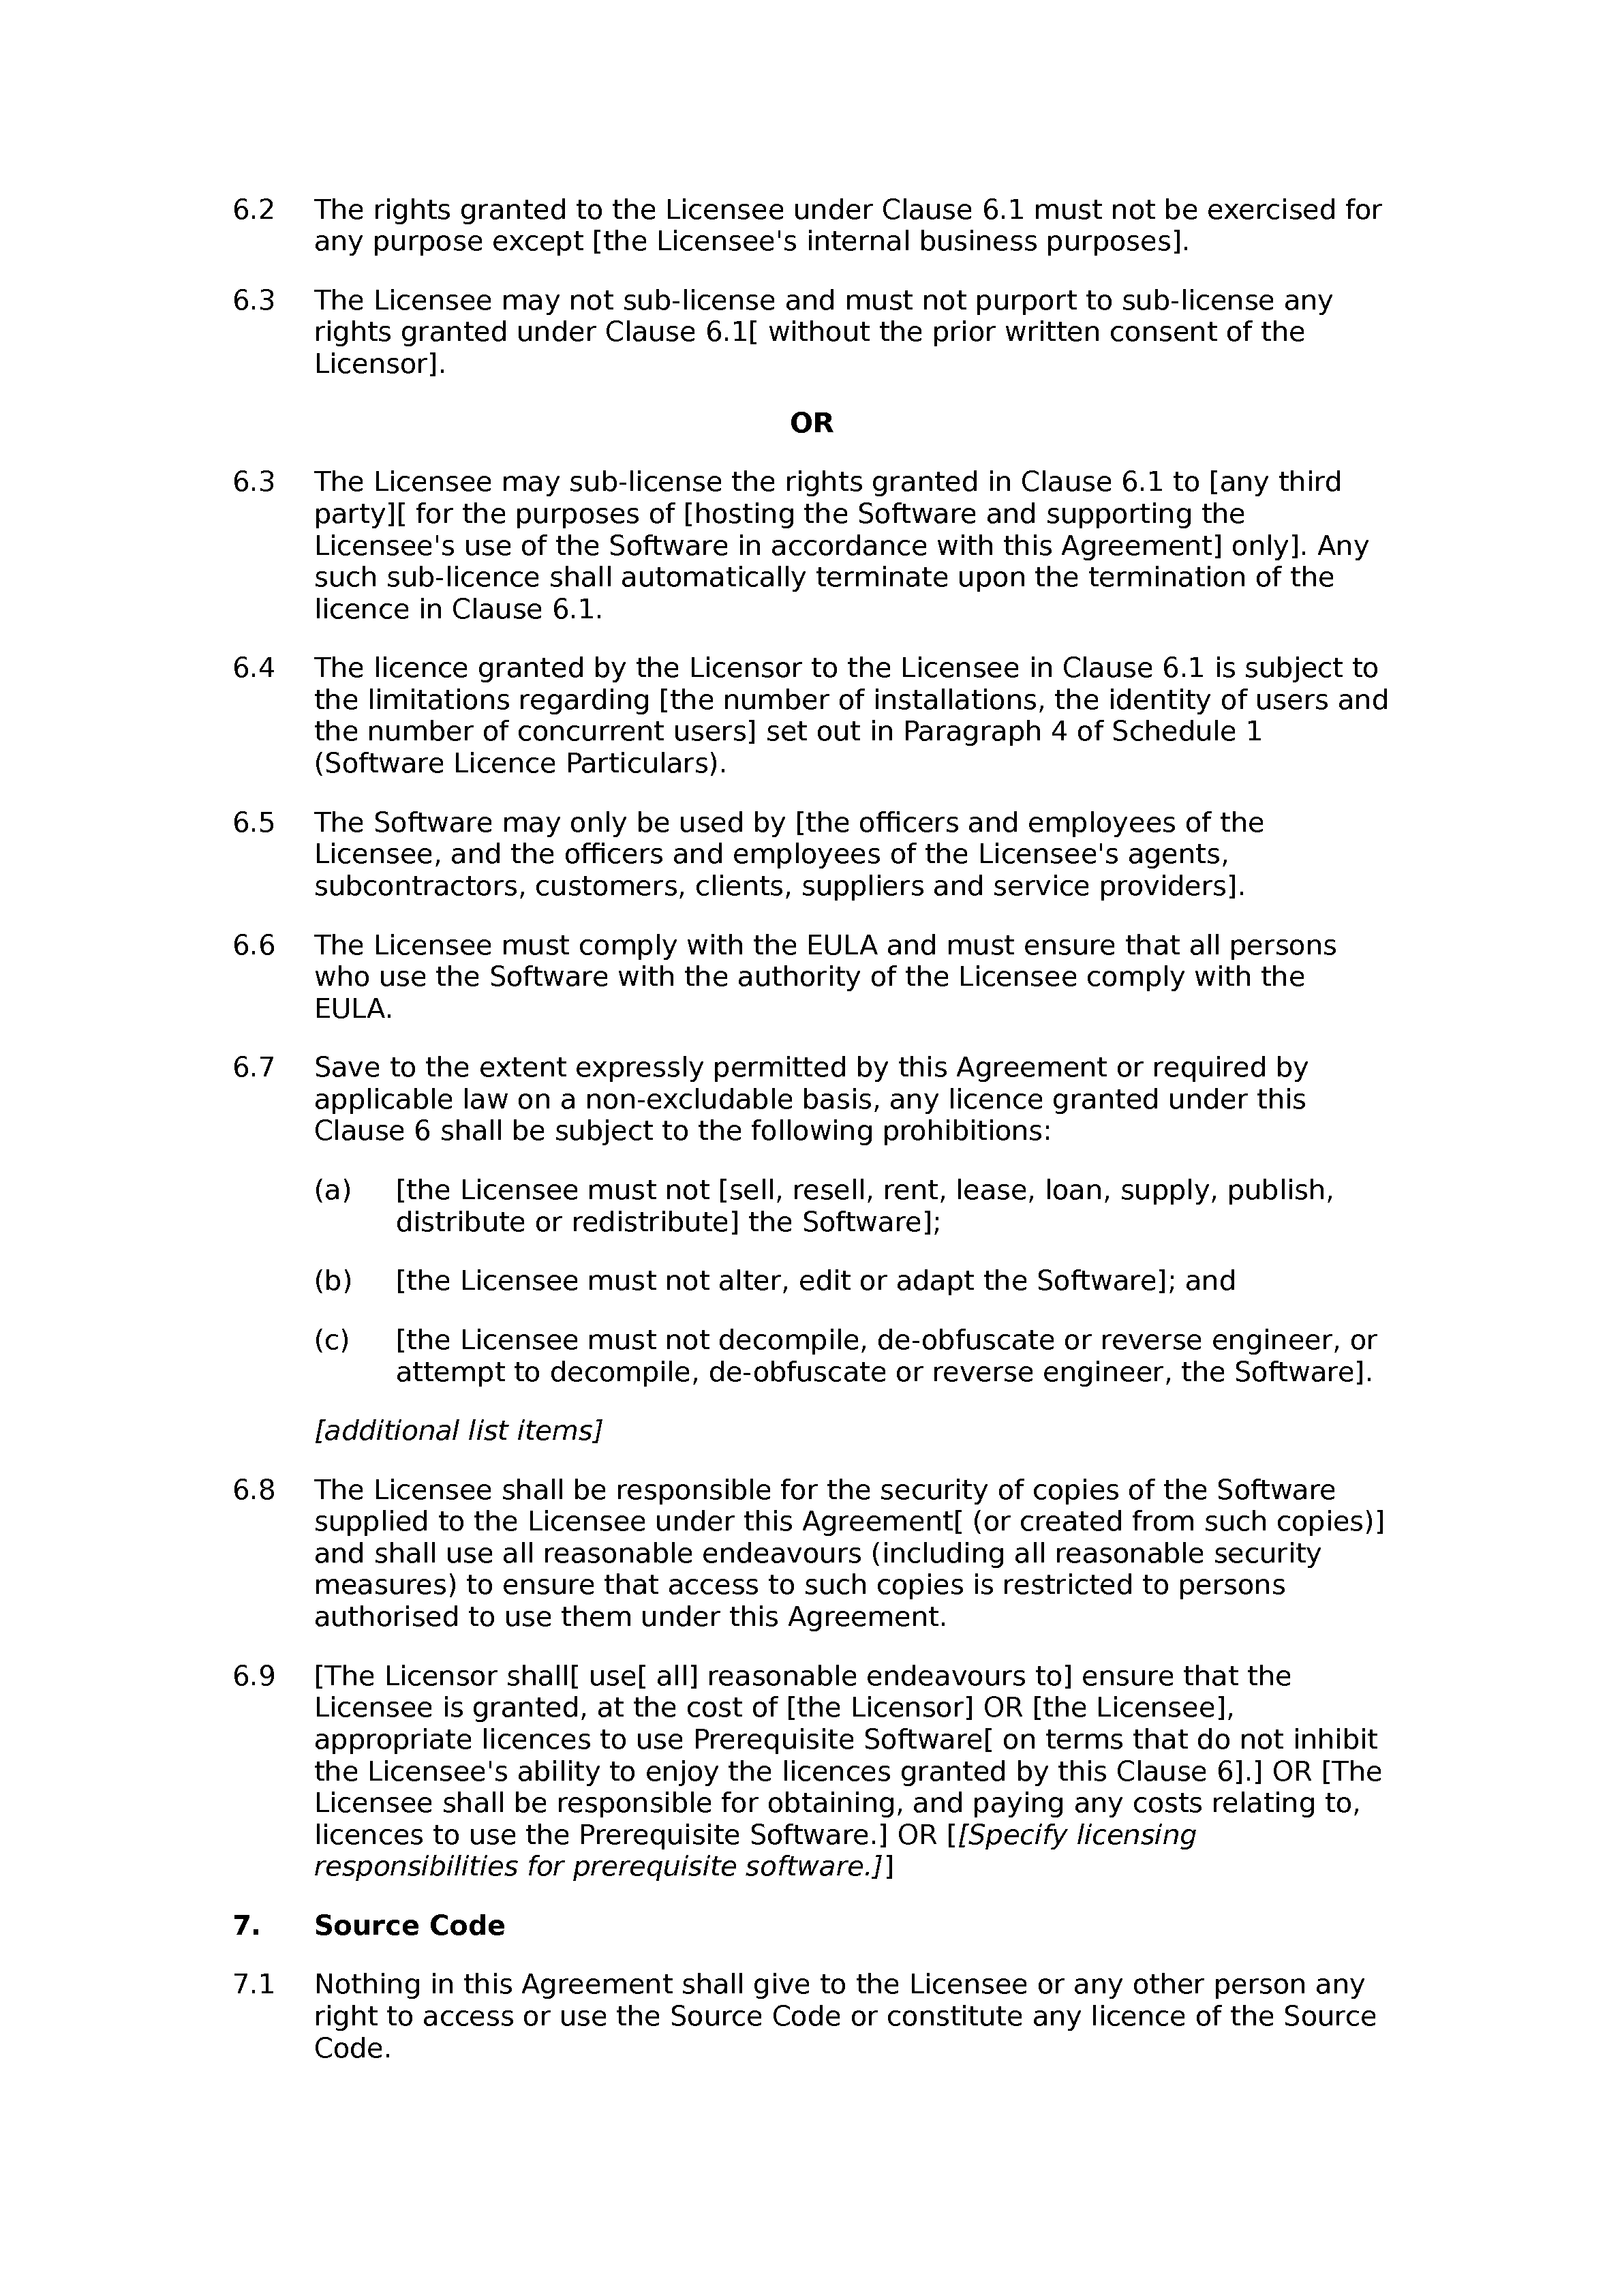 Software licence and support agreement (standard) document preview